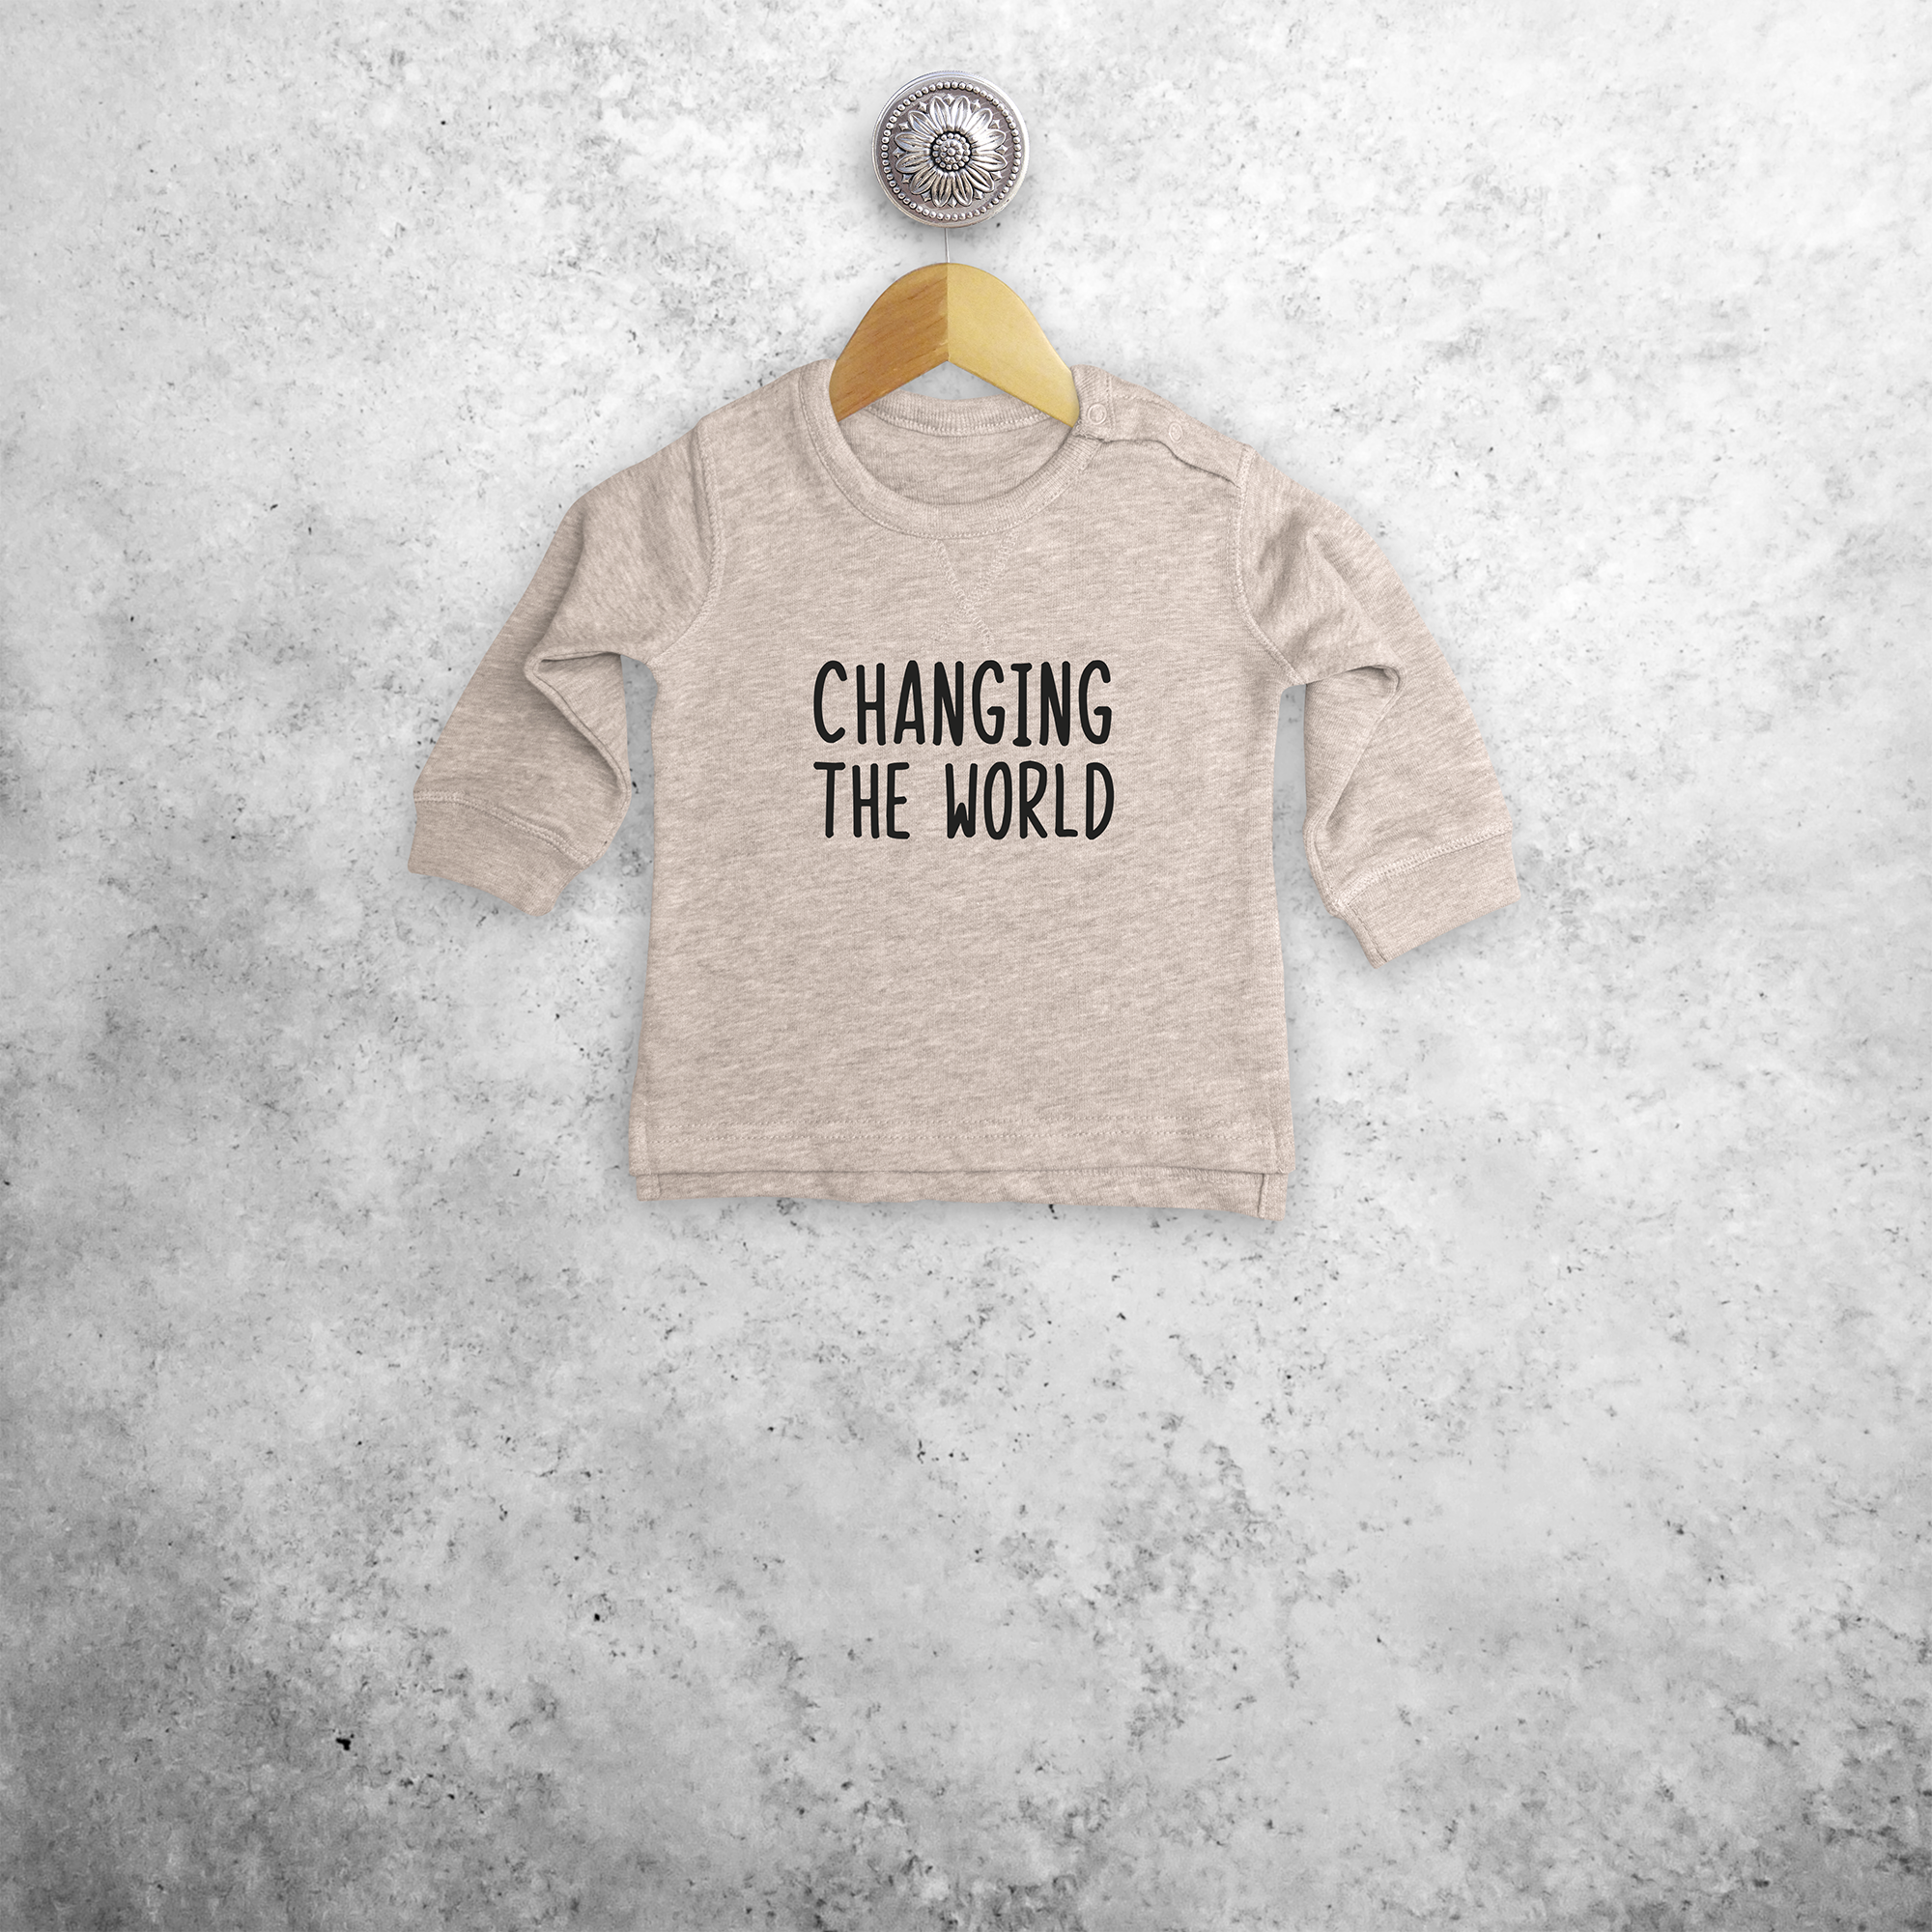 'Changing the world' baby sweater